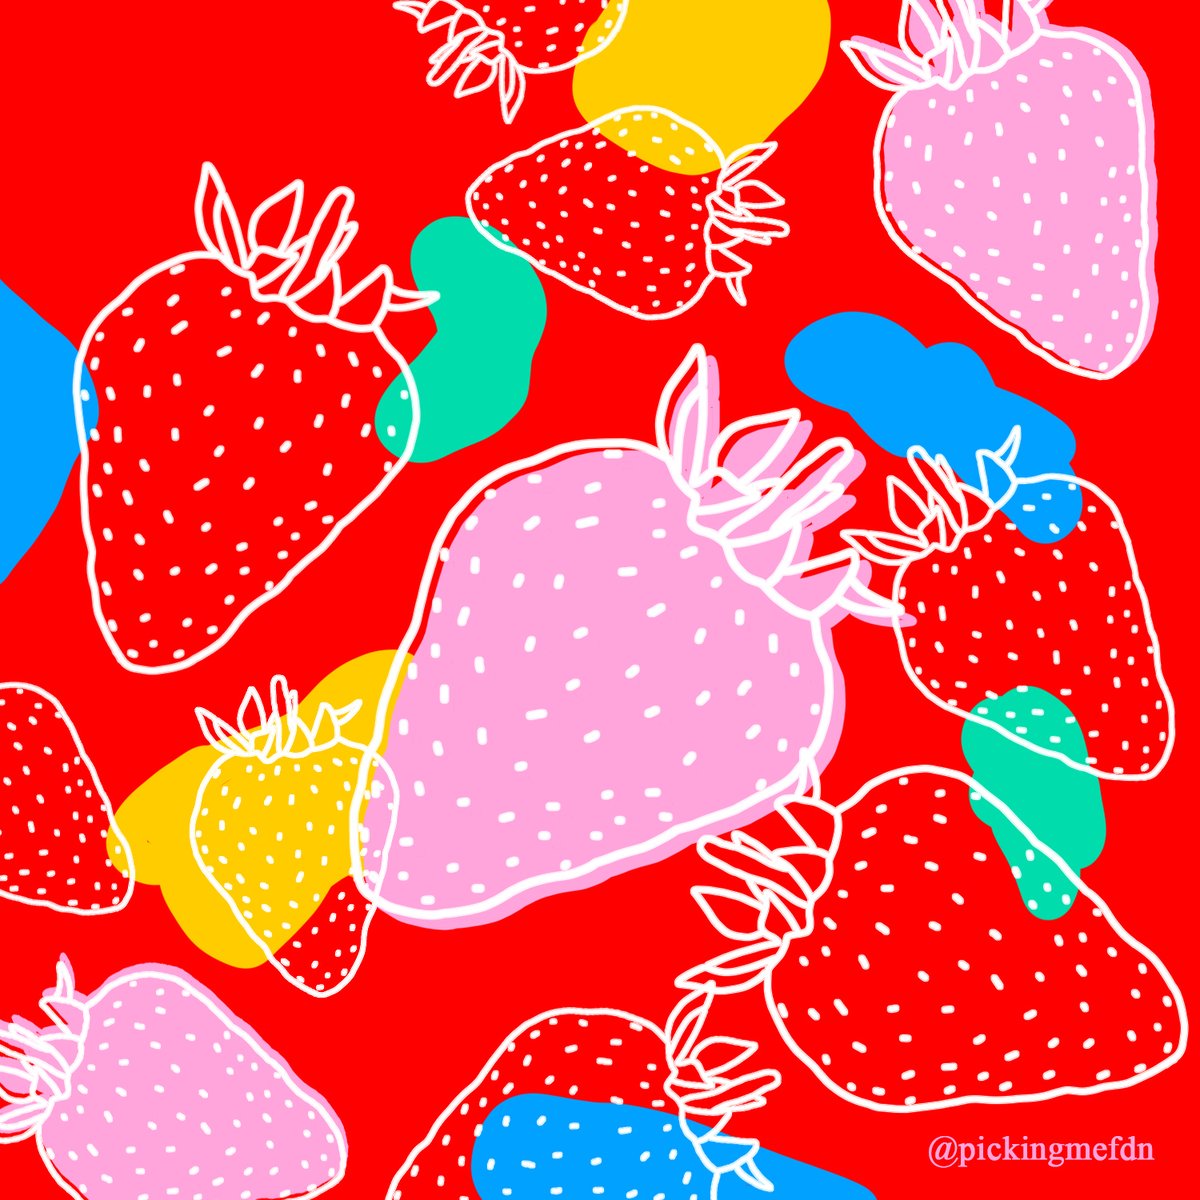 Craving a sweet #summer snack while looking to keep your fingers busy? Grab a handful of #strawberries and pick out the seeds as you munch to keep your fingers off your body!
~
What's you fav snack?
#PickingMe over #SkinPicking